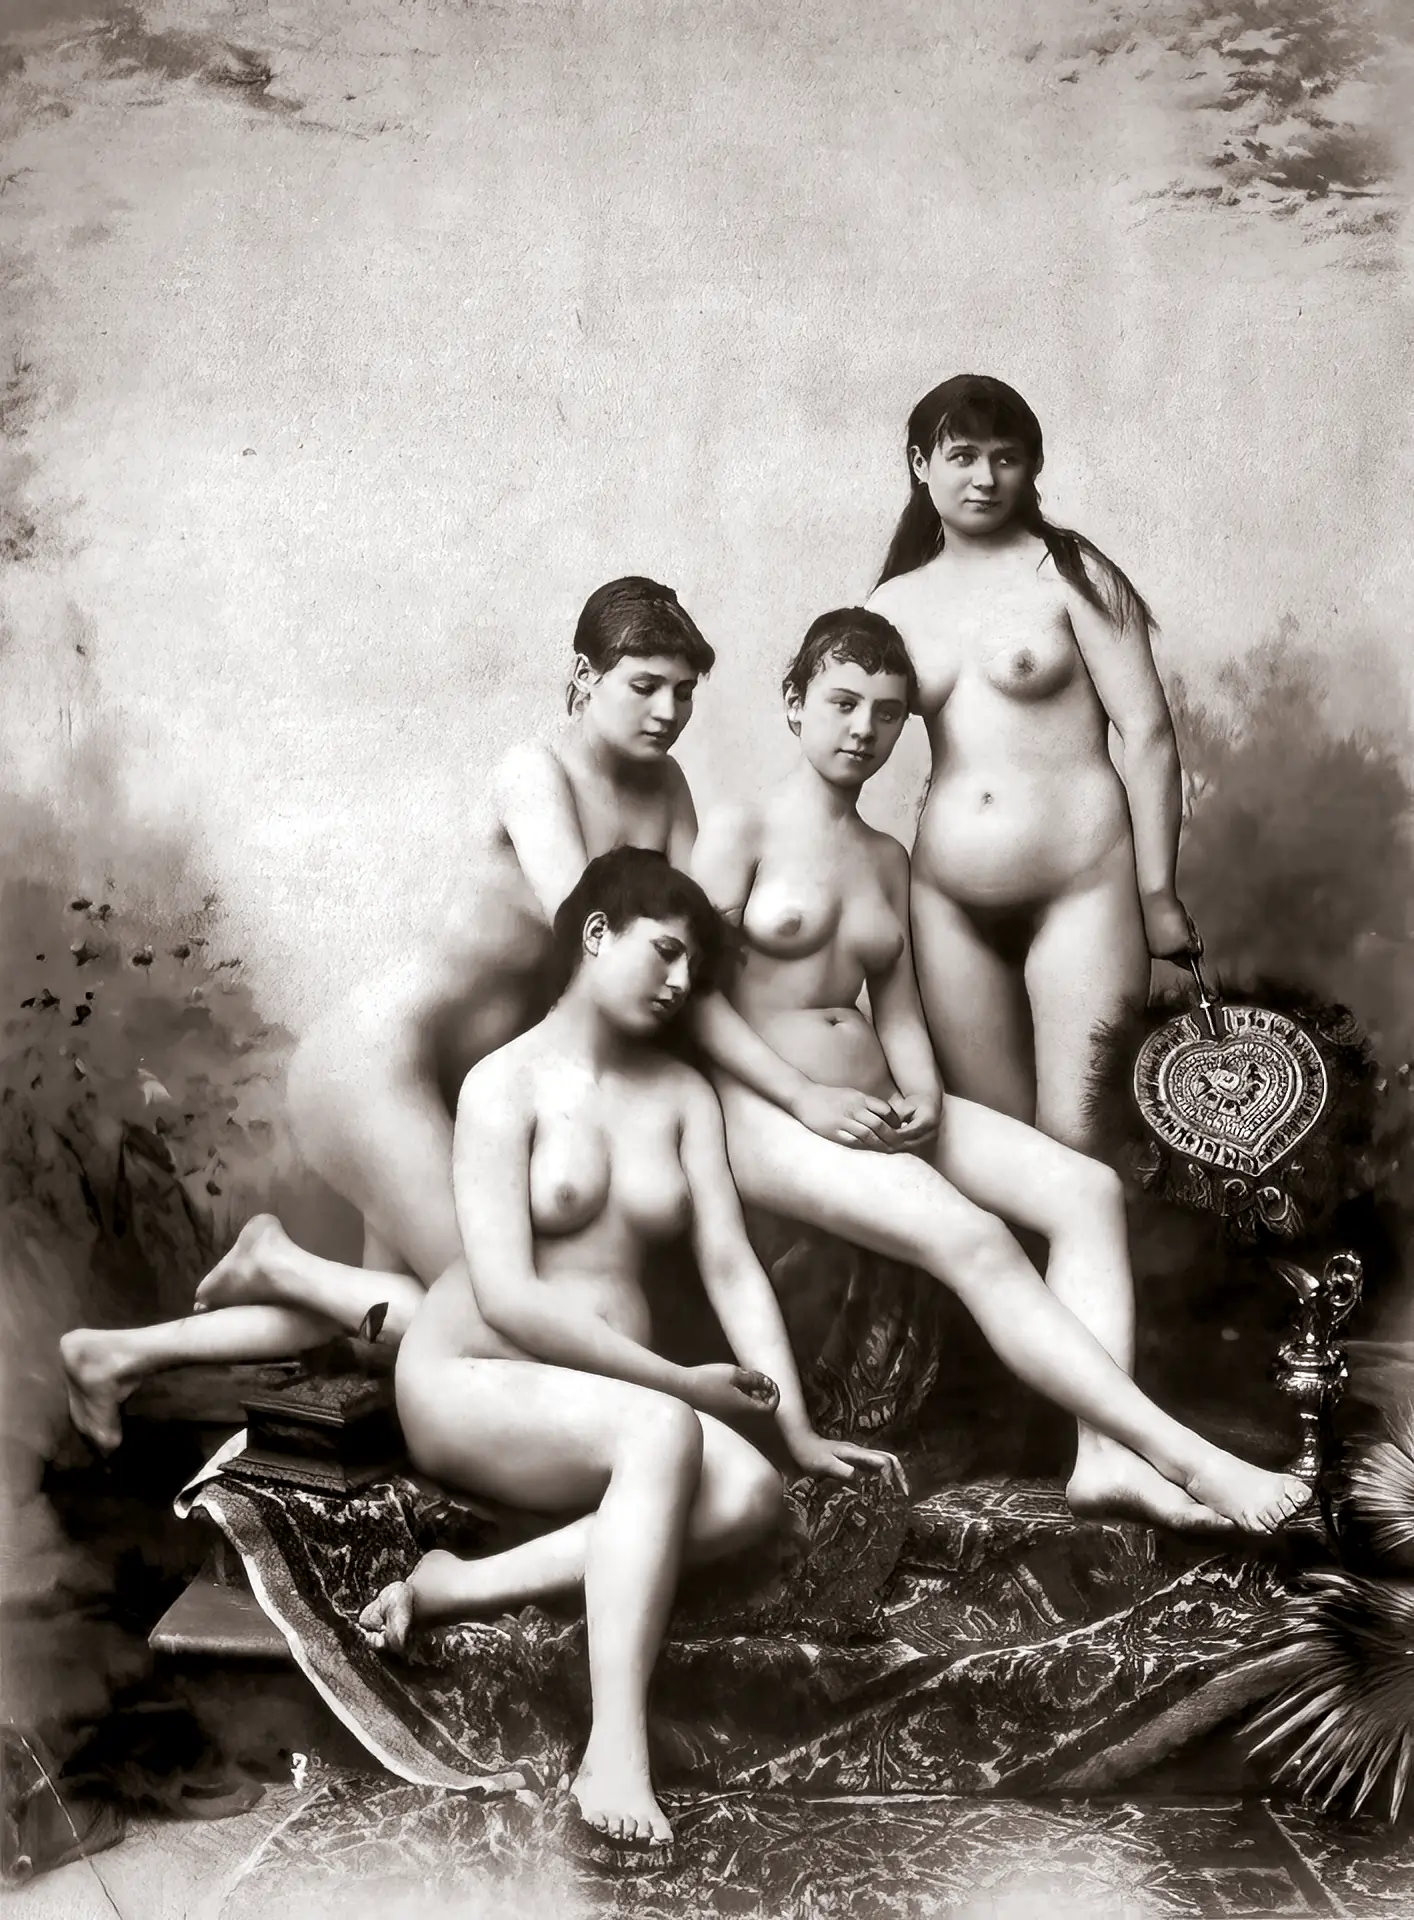 Four antique women older and young with firm boobs and curvy bodies